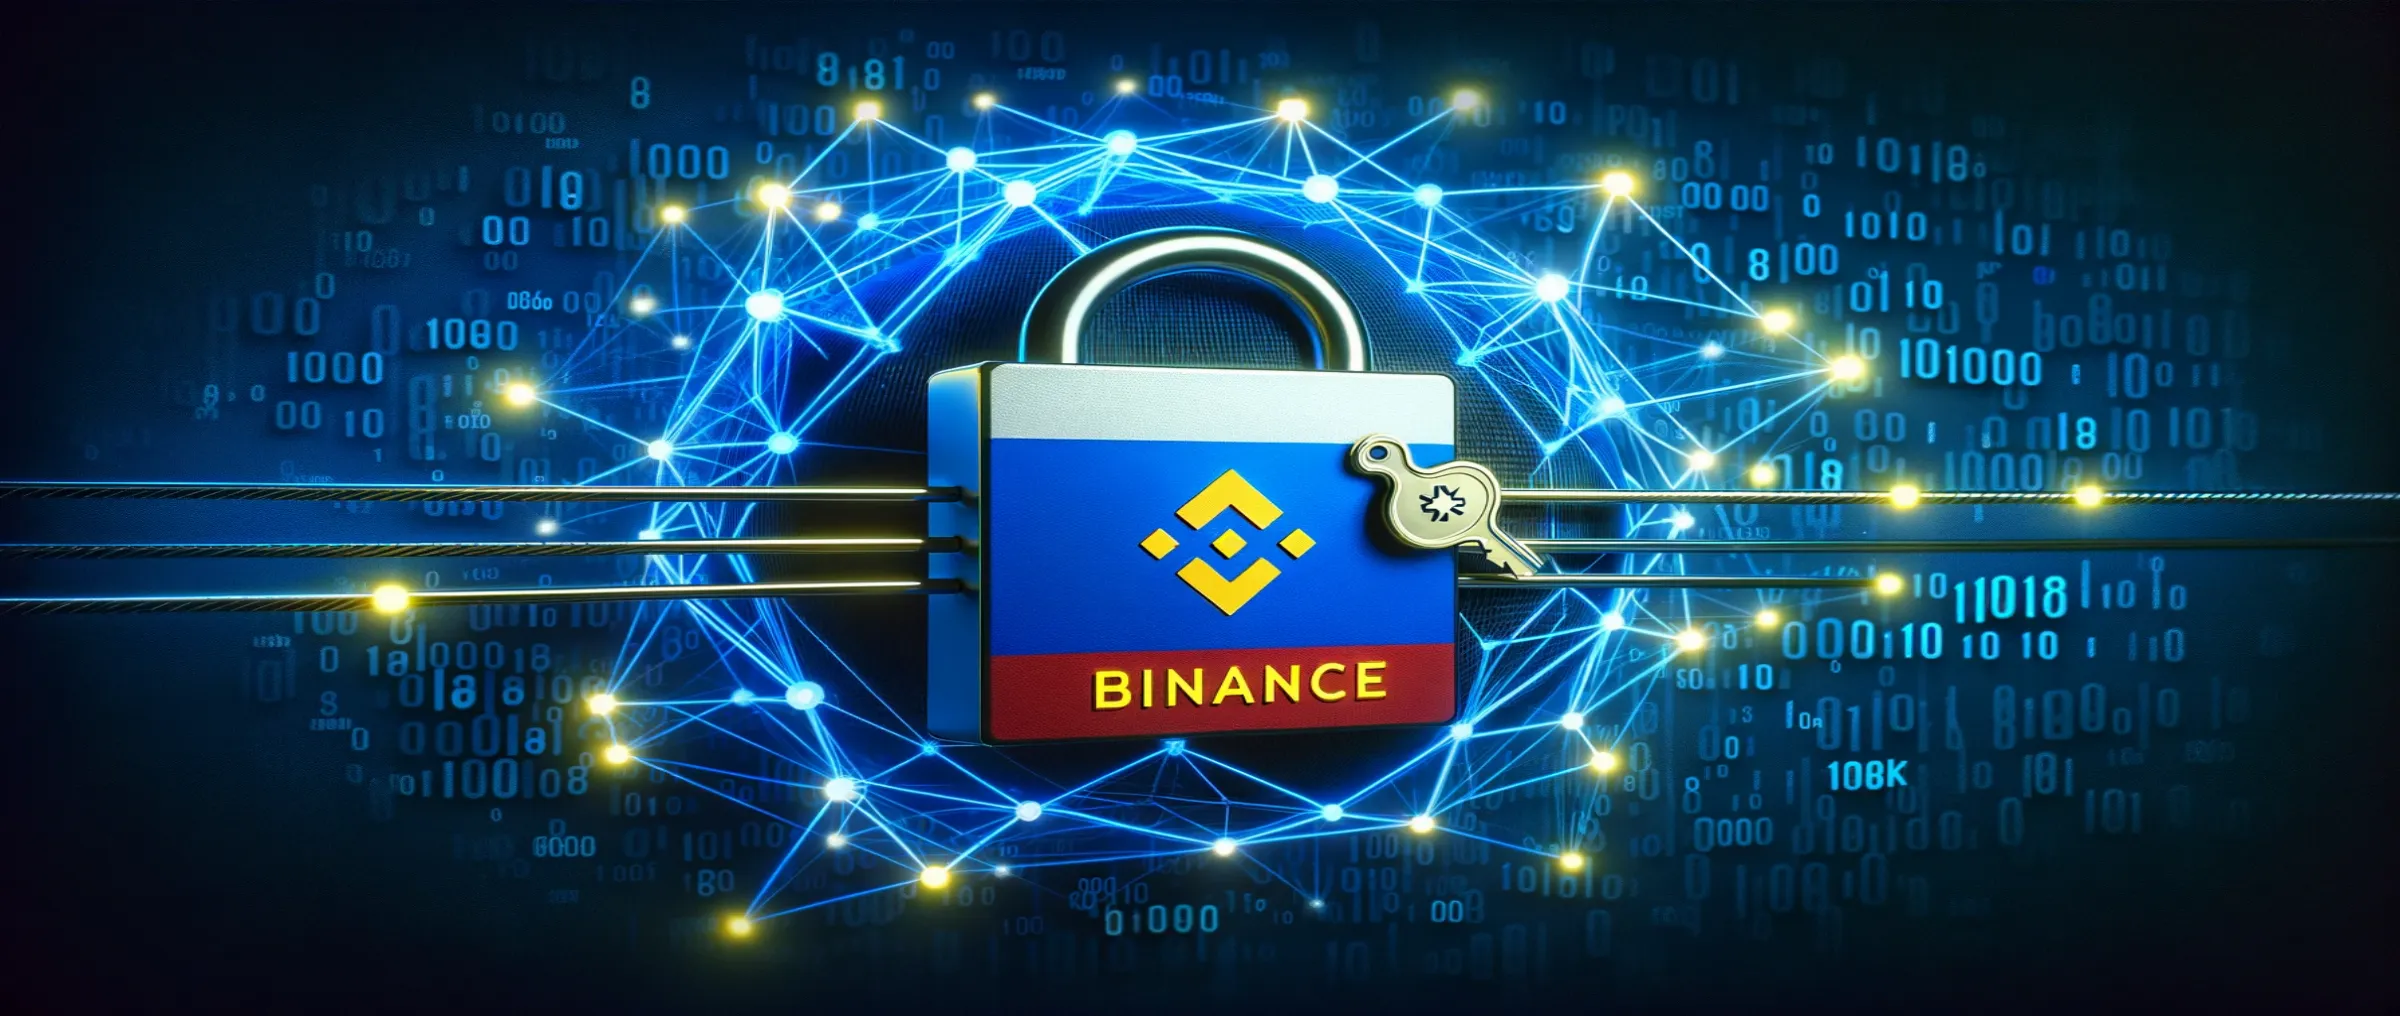 Binance has closed the access of Russians to the P2P service